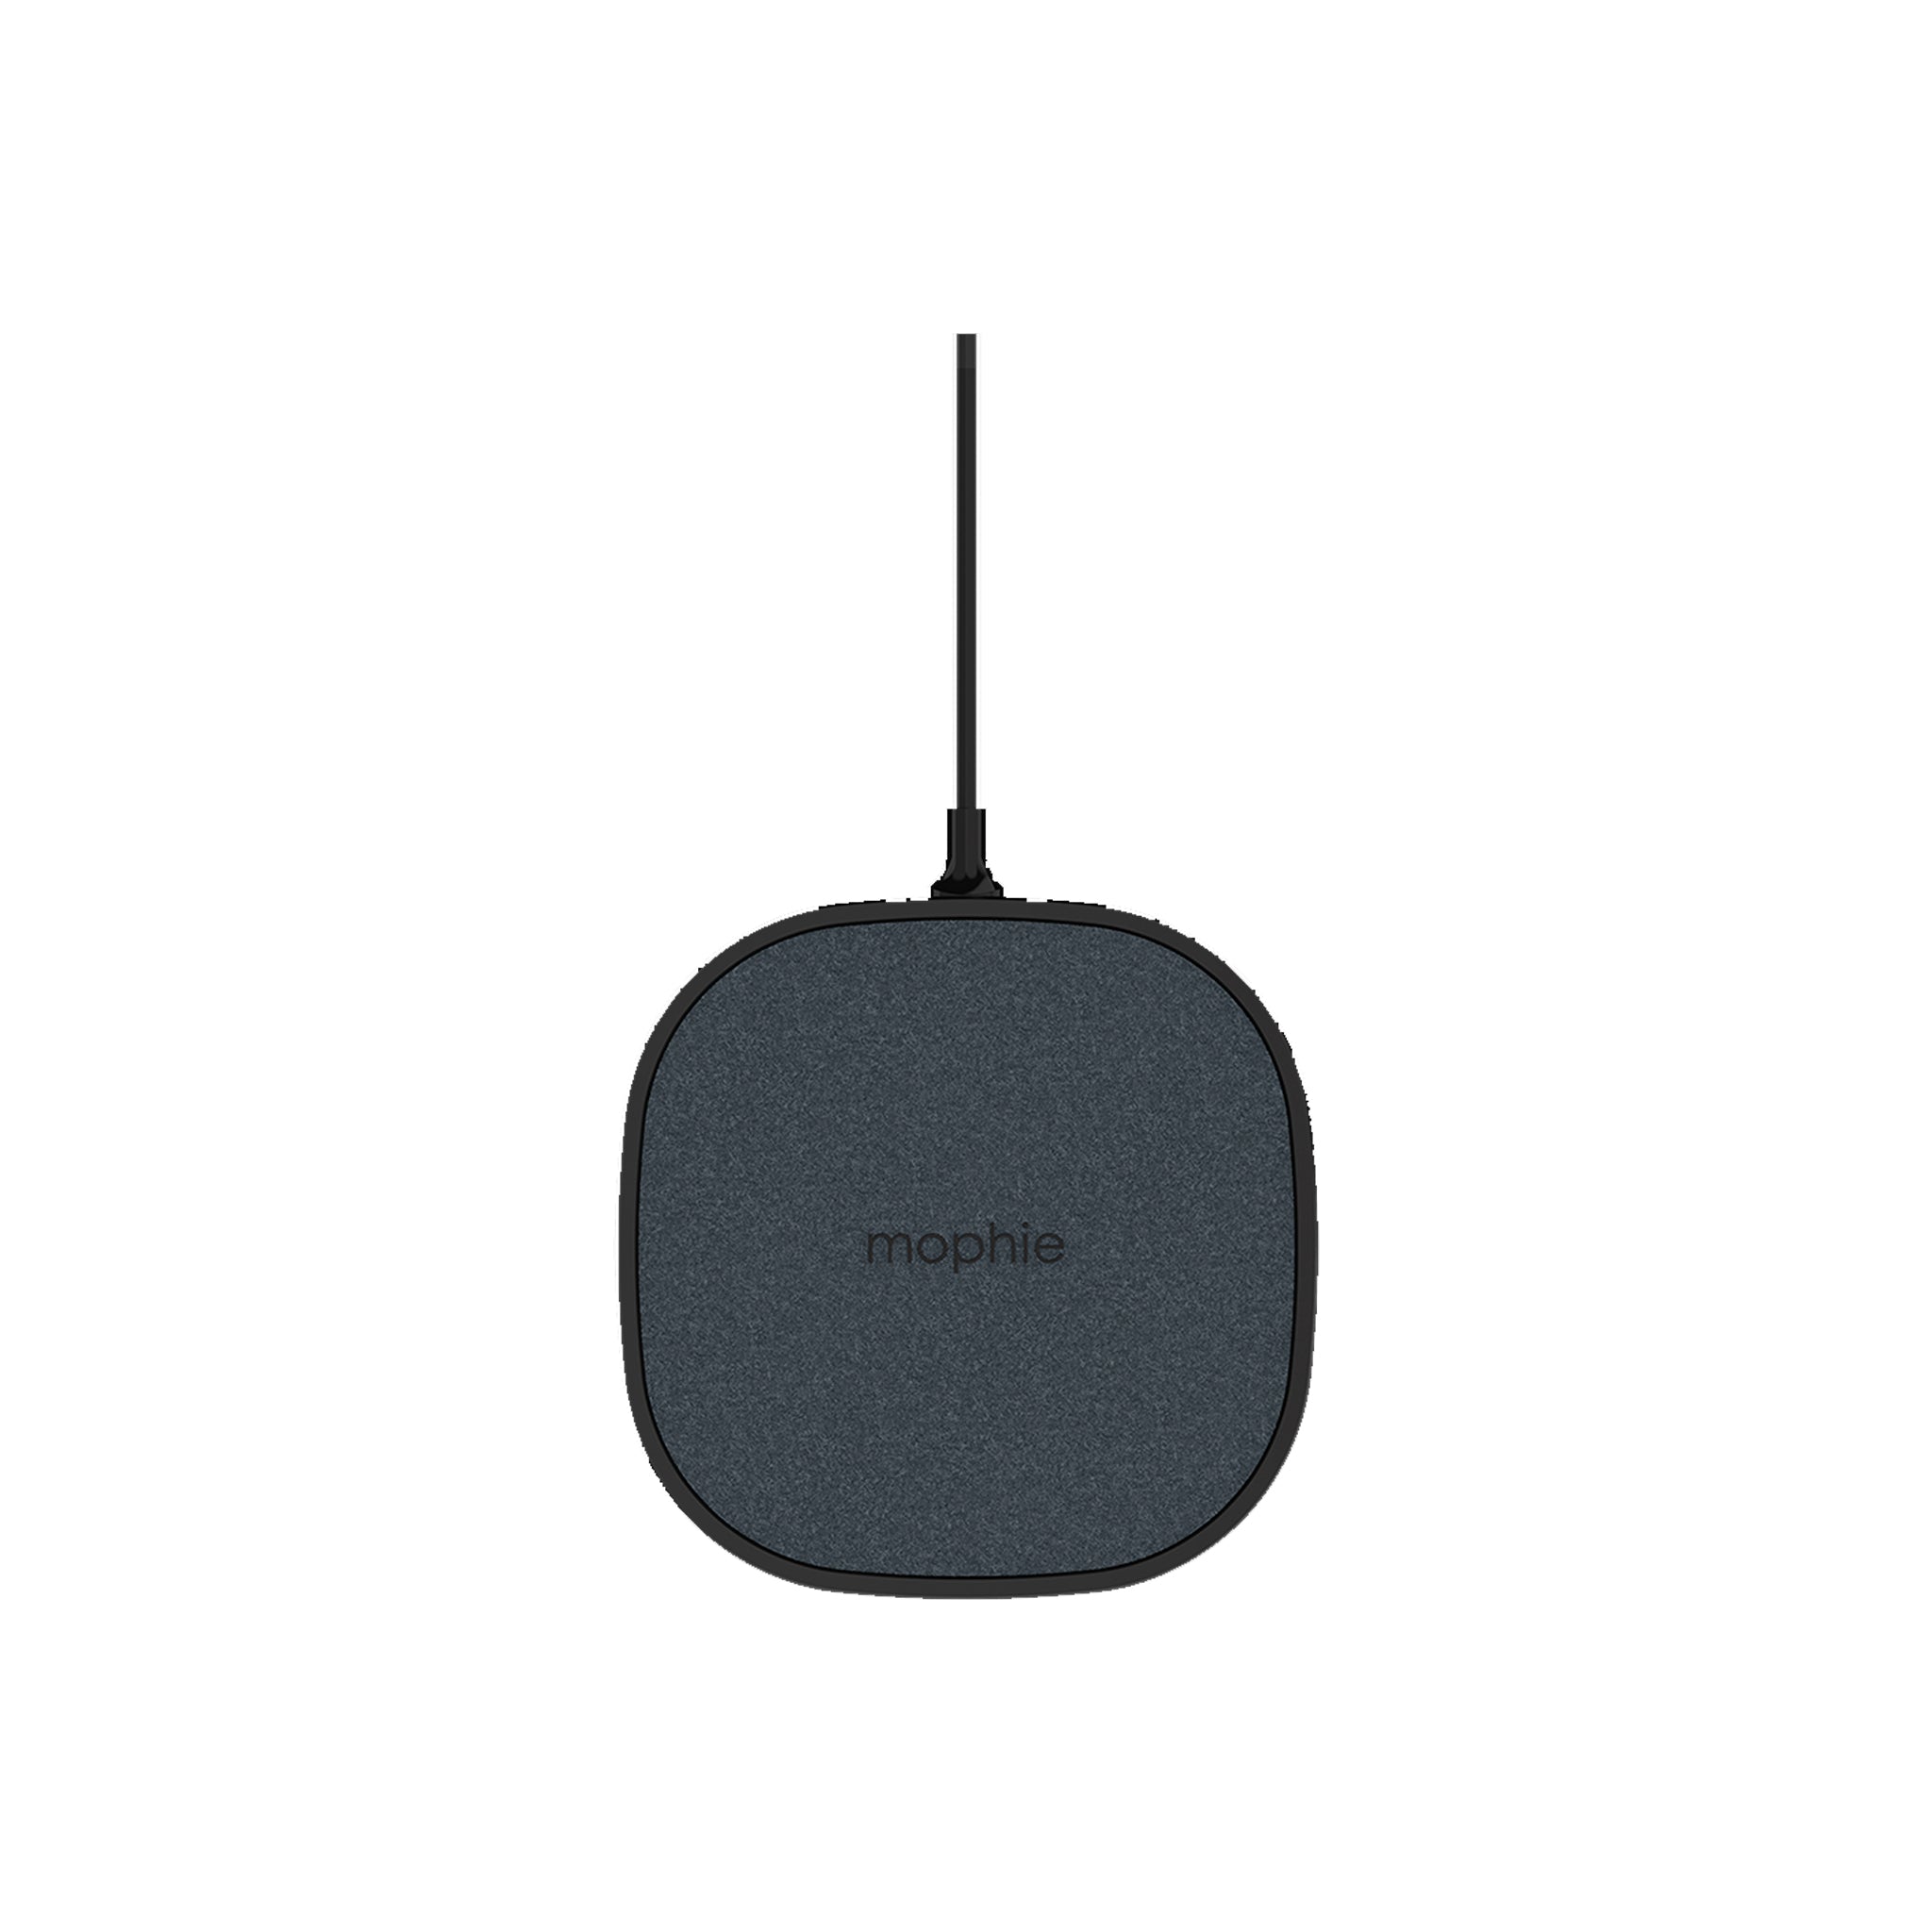 Mophie - Wireless Charing Pad 10w - Black